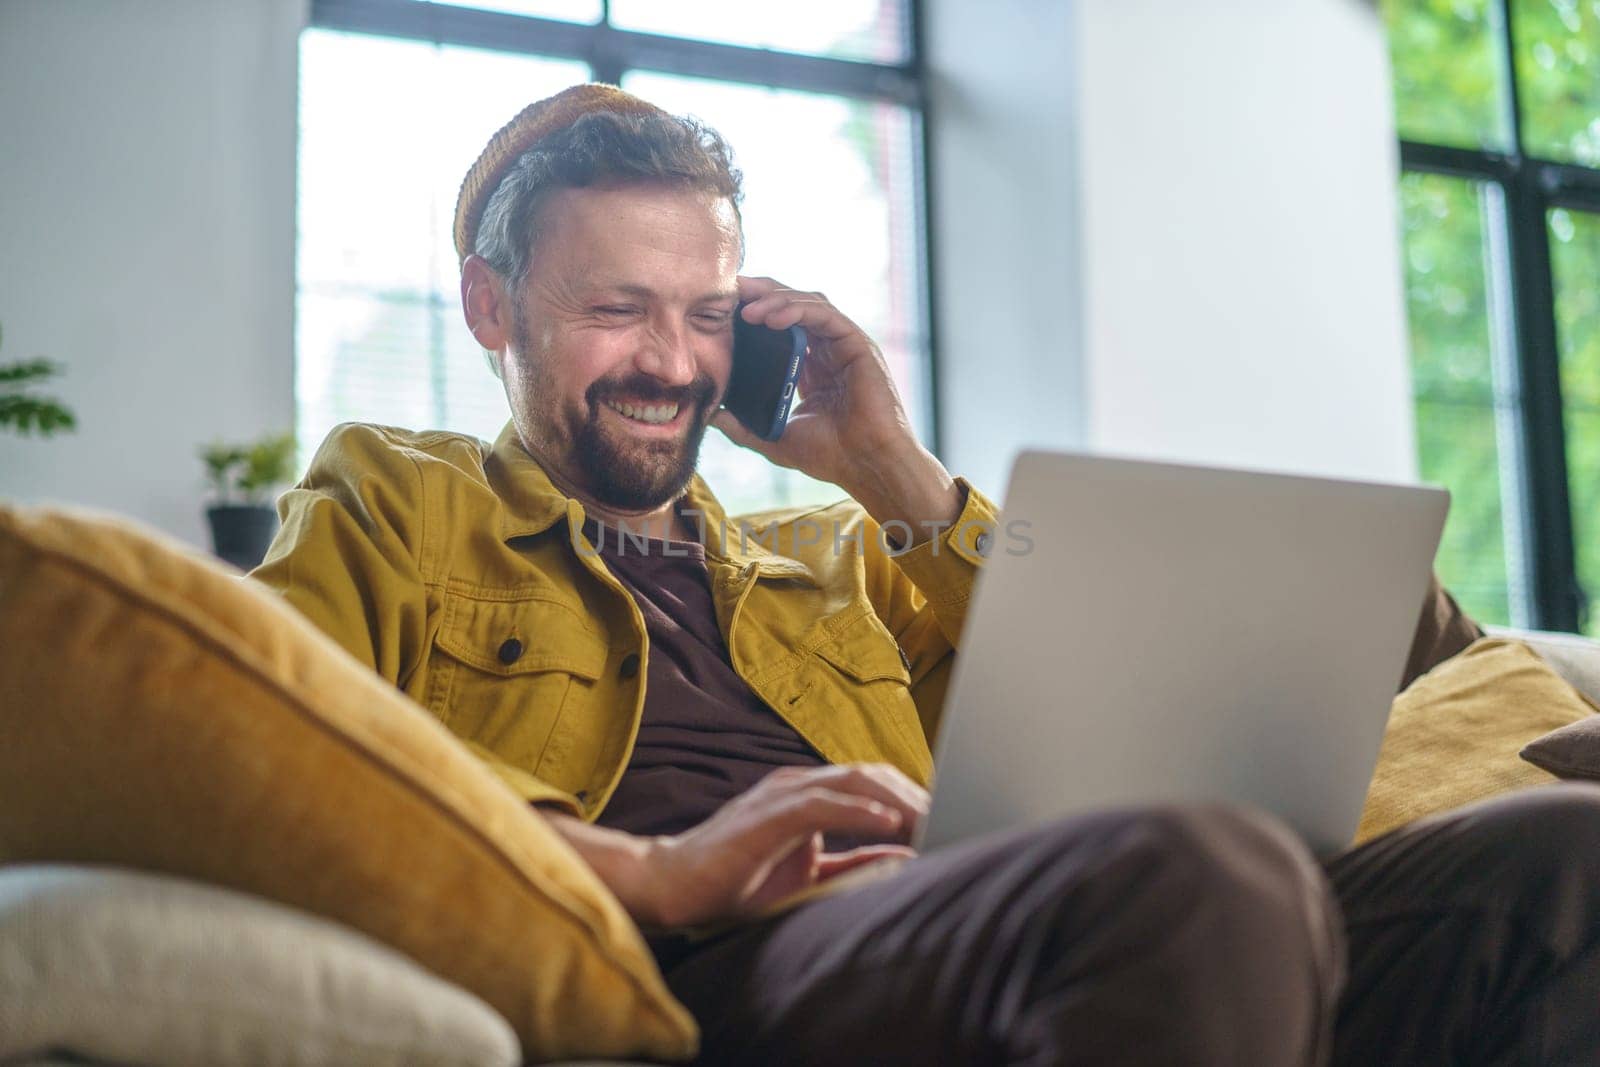 Smiling man having conversation on phone while working on laptop on sofa in office. He dressed in casual wear and most likely programmer or IT professional. by LipikStockMedia